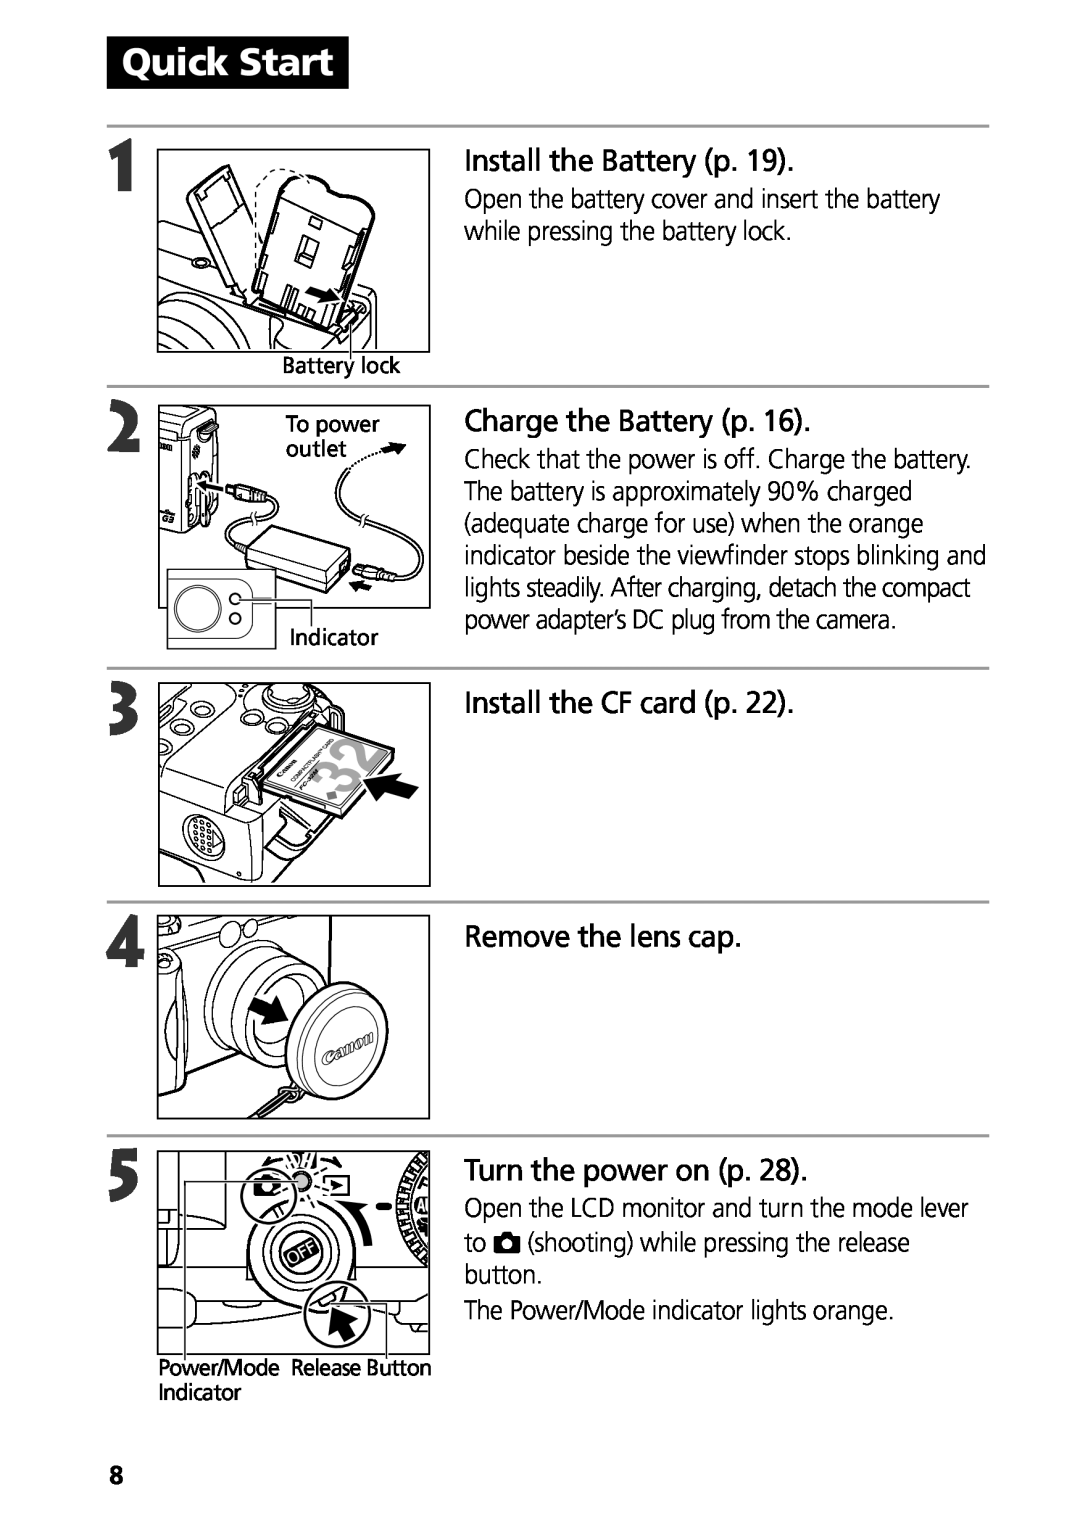 Canon G3 manual Quick Start, Install the Battery p, Charge the Battery p, Turn the power on p, Remove the lens cap 